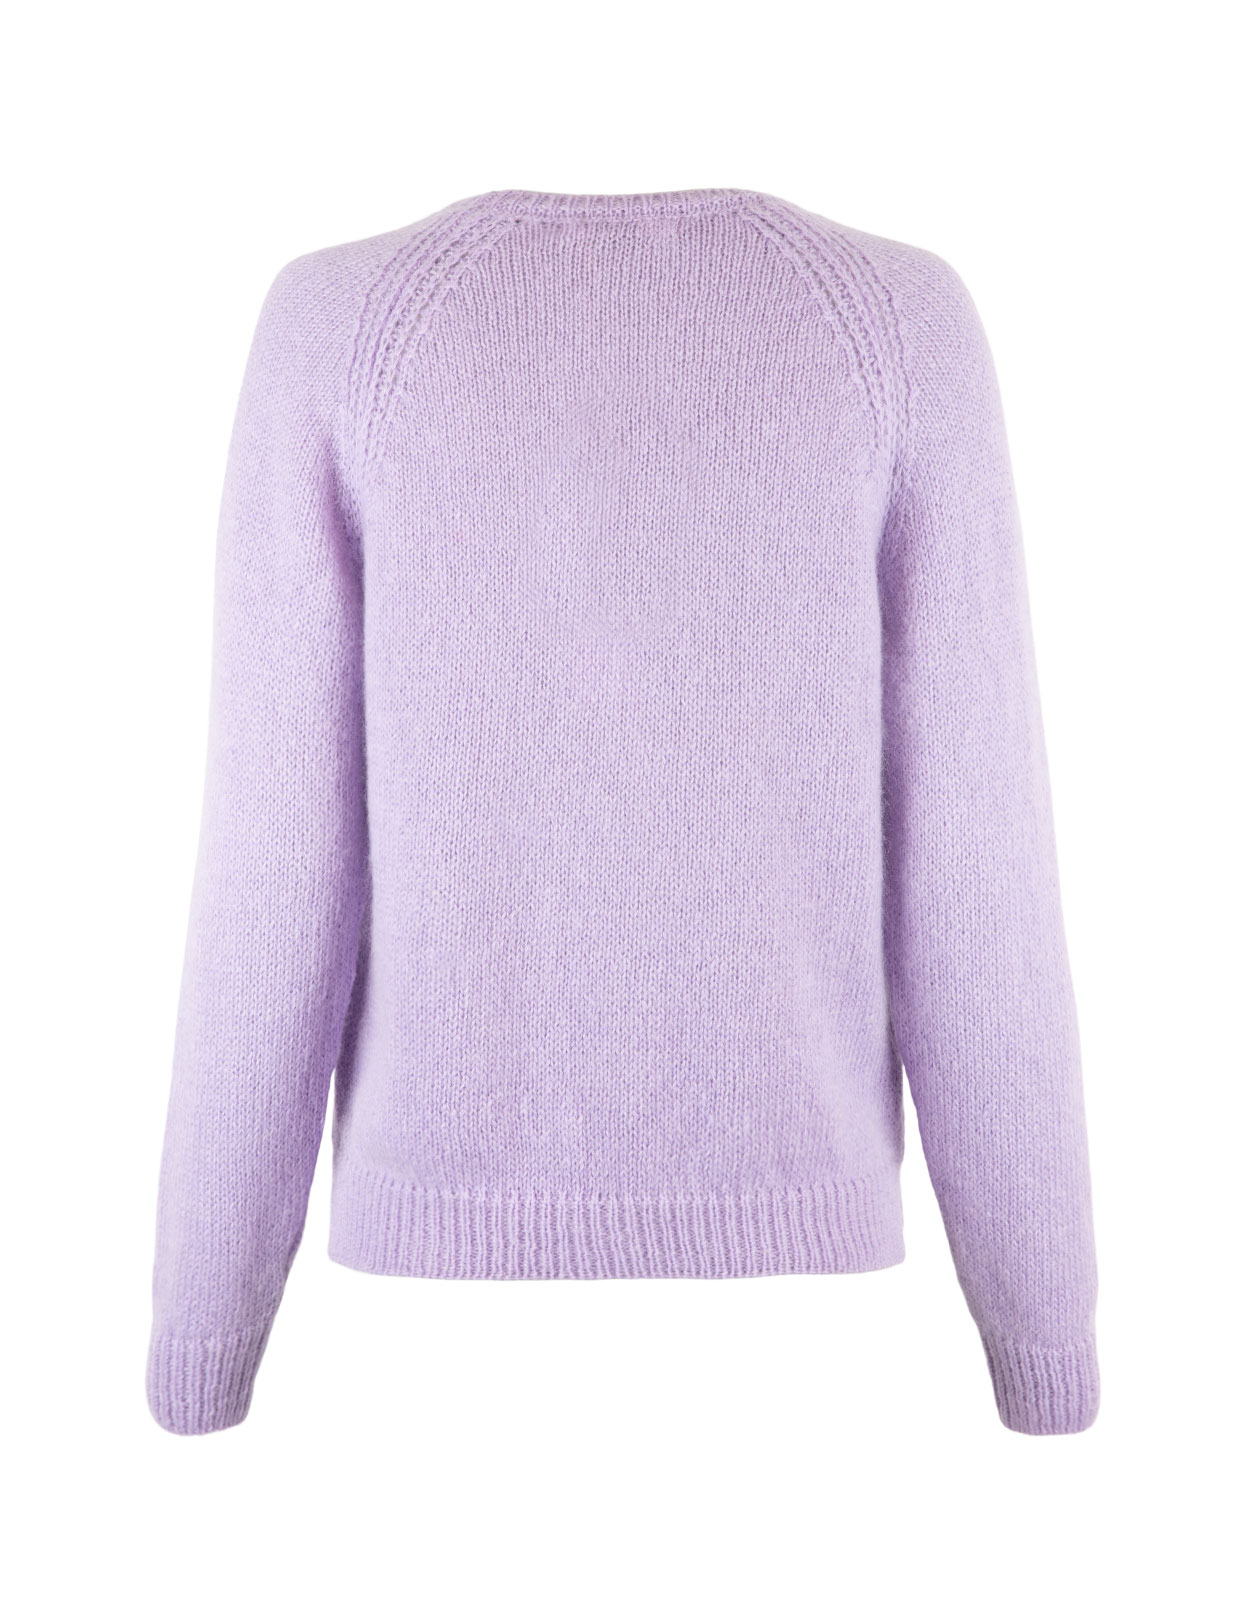 Wales Knitted Top Light Purple